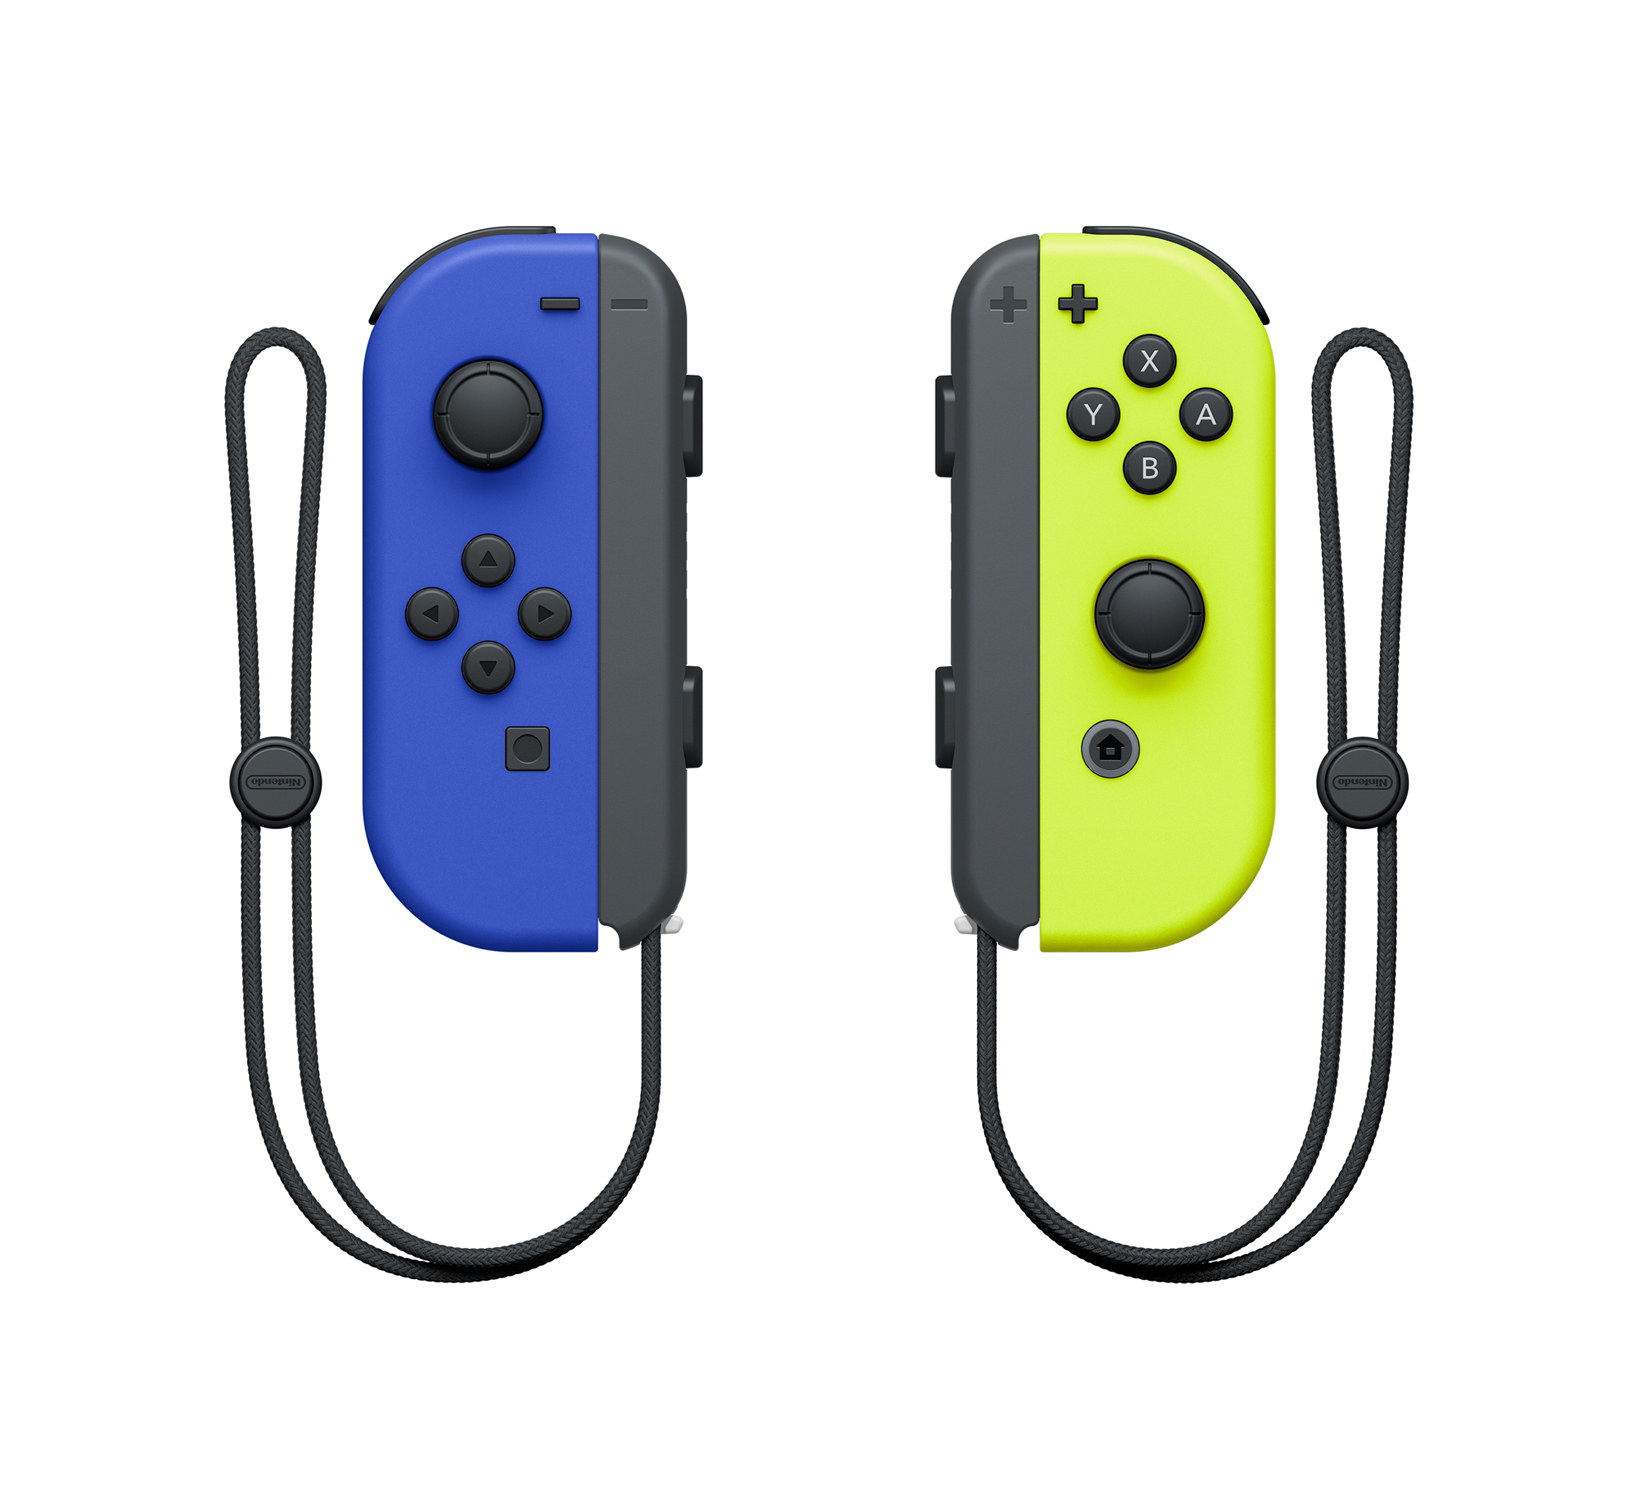 The Nintendo Switch controllers